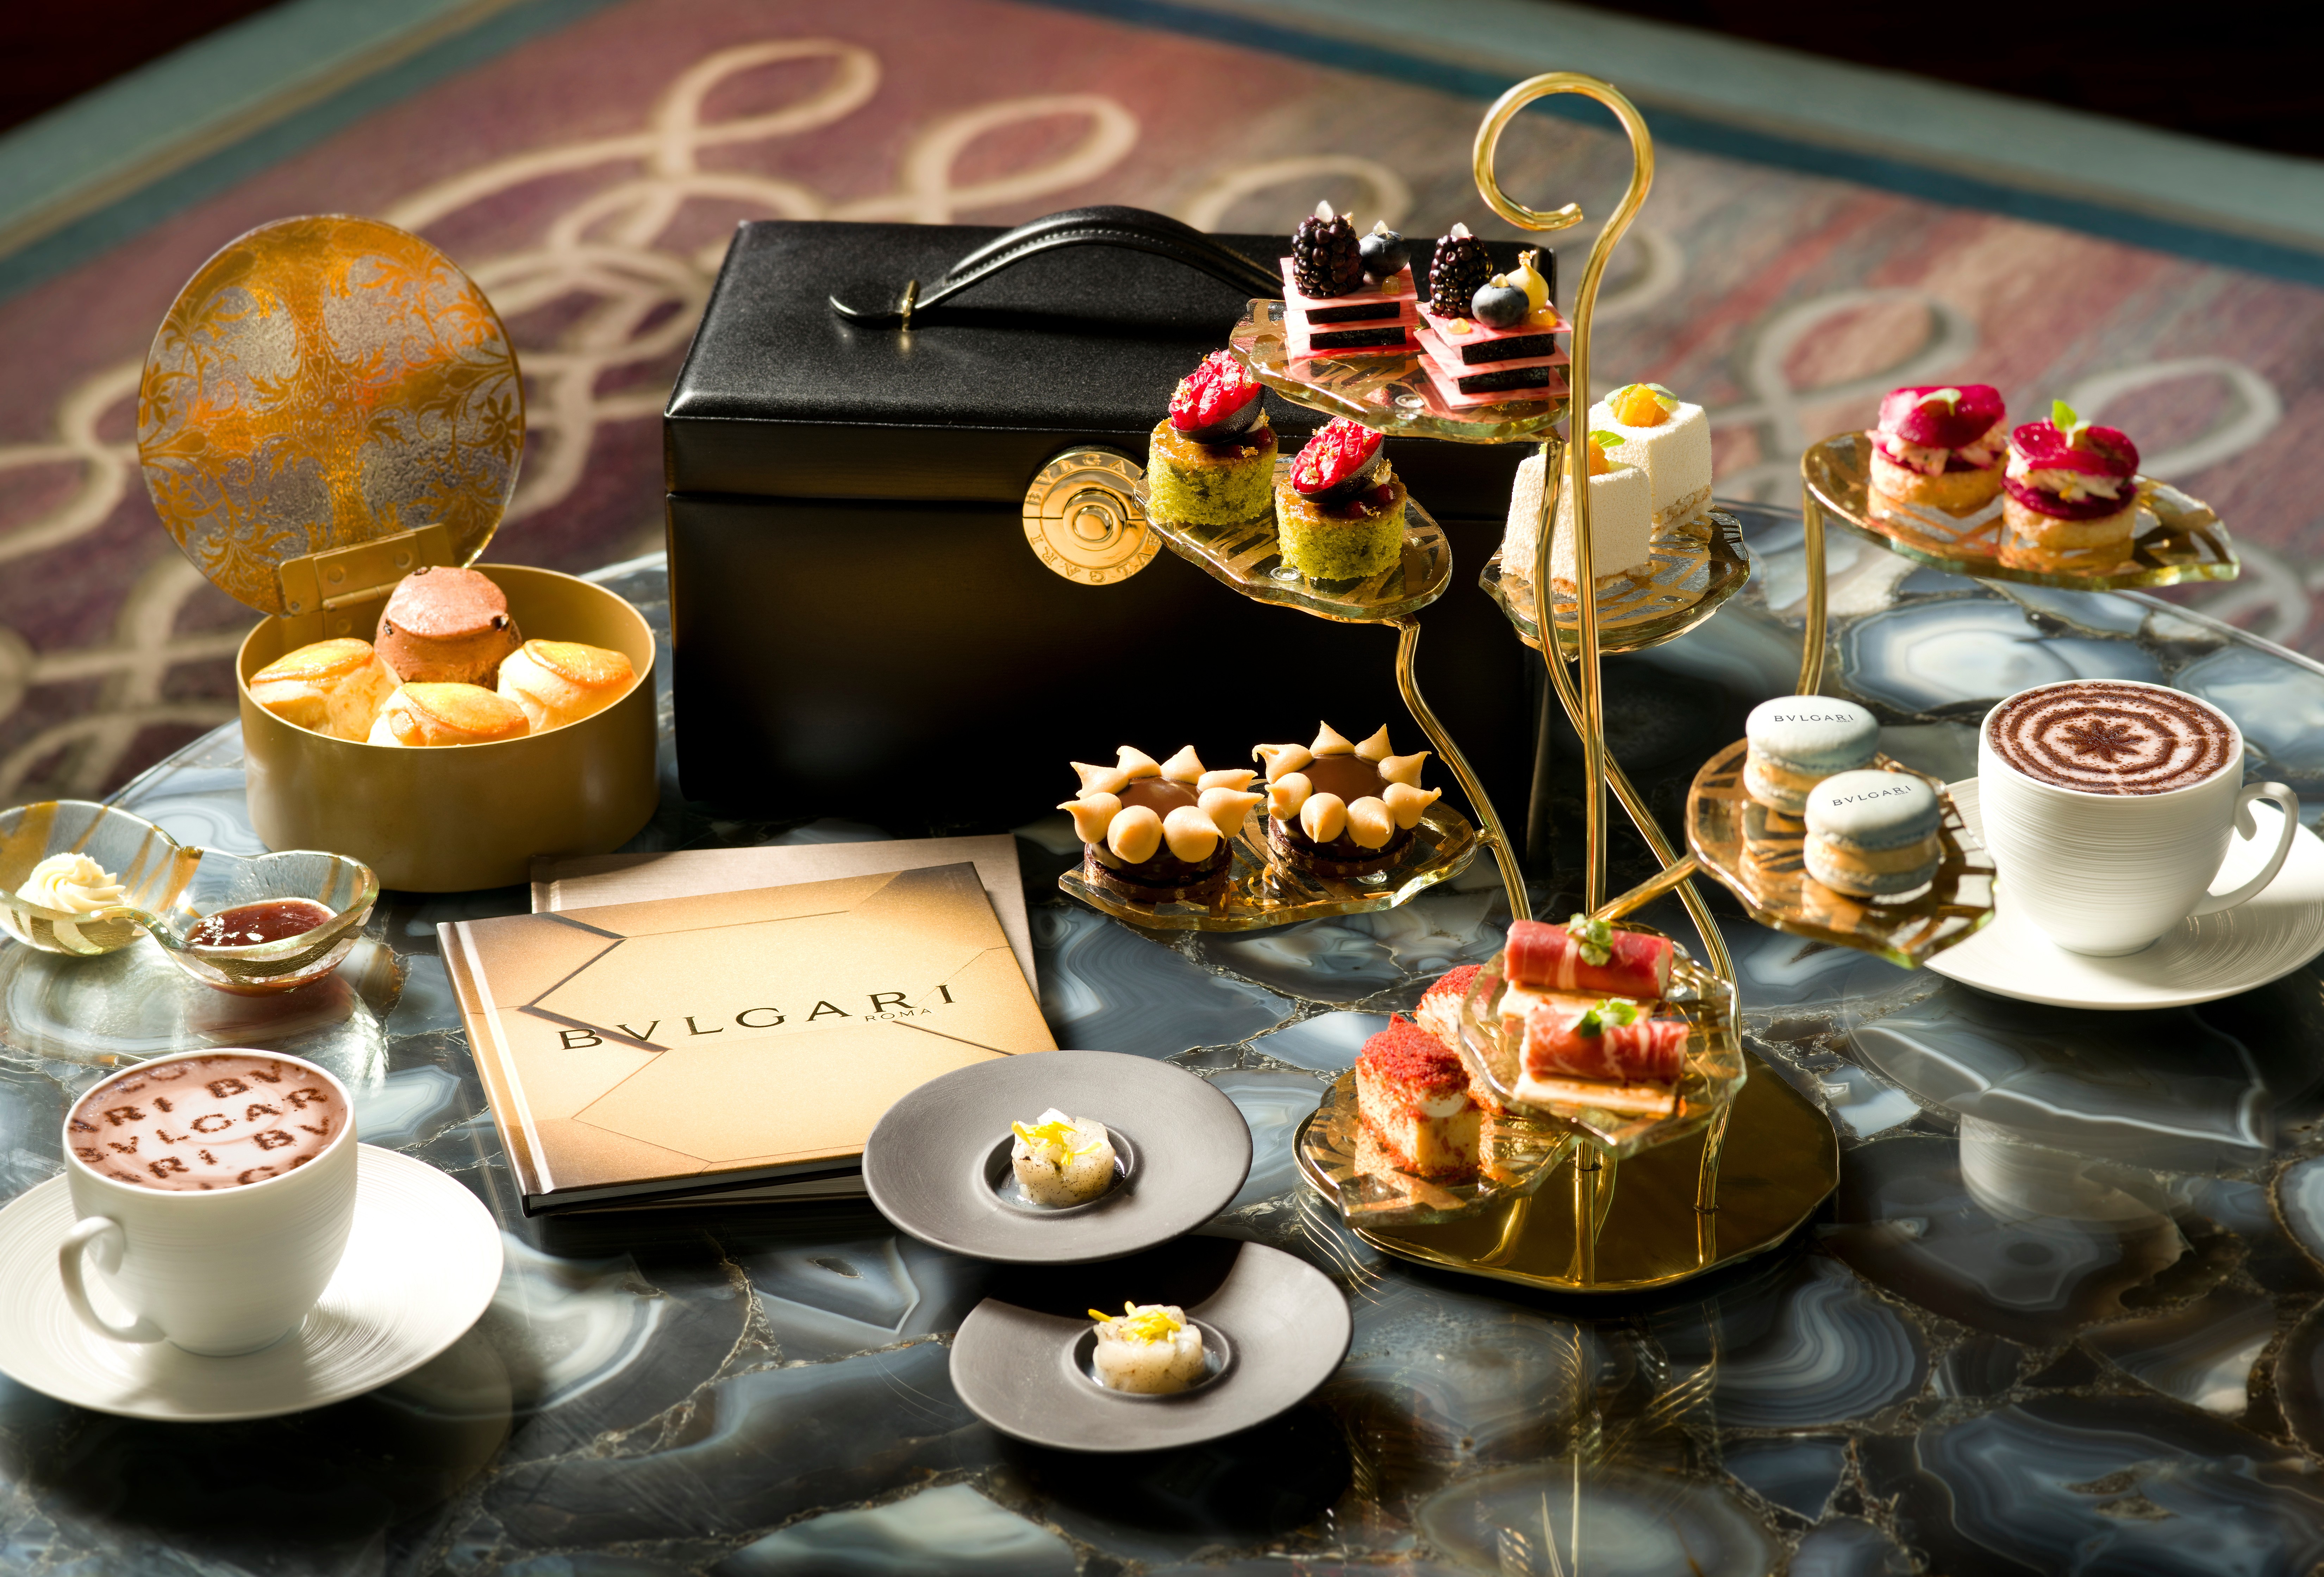 Bulgari teams up with The Ritz-Carlton Bar & Lounge to offer guests a delightful shopping and culinary experience.